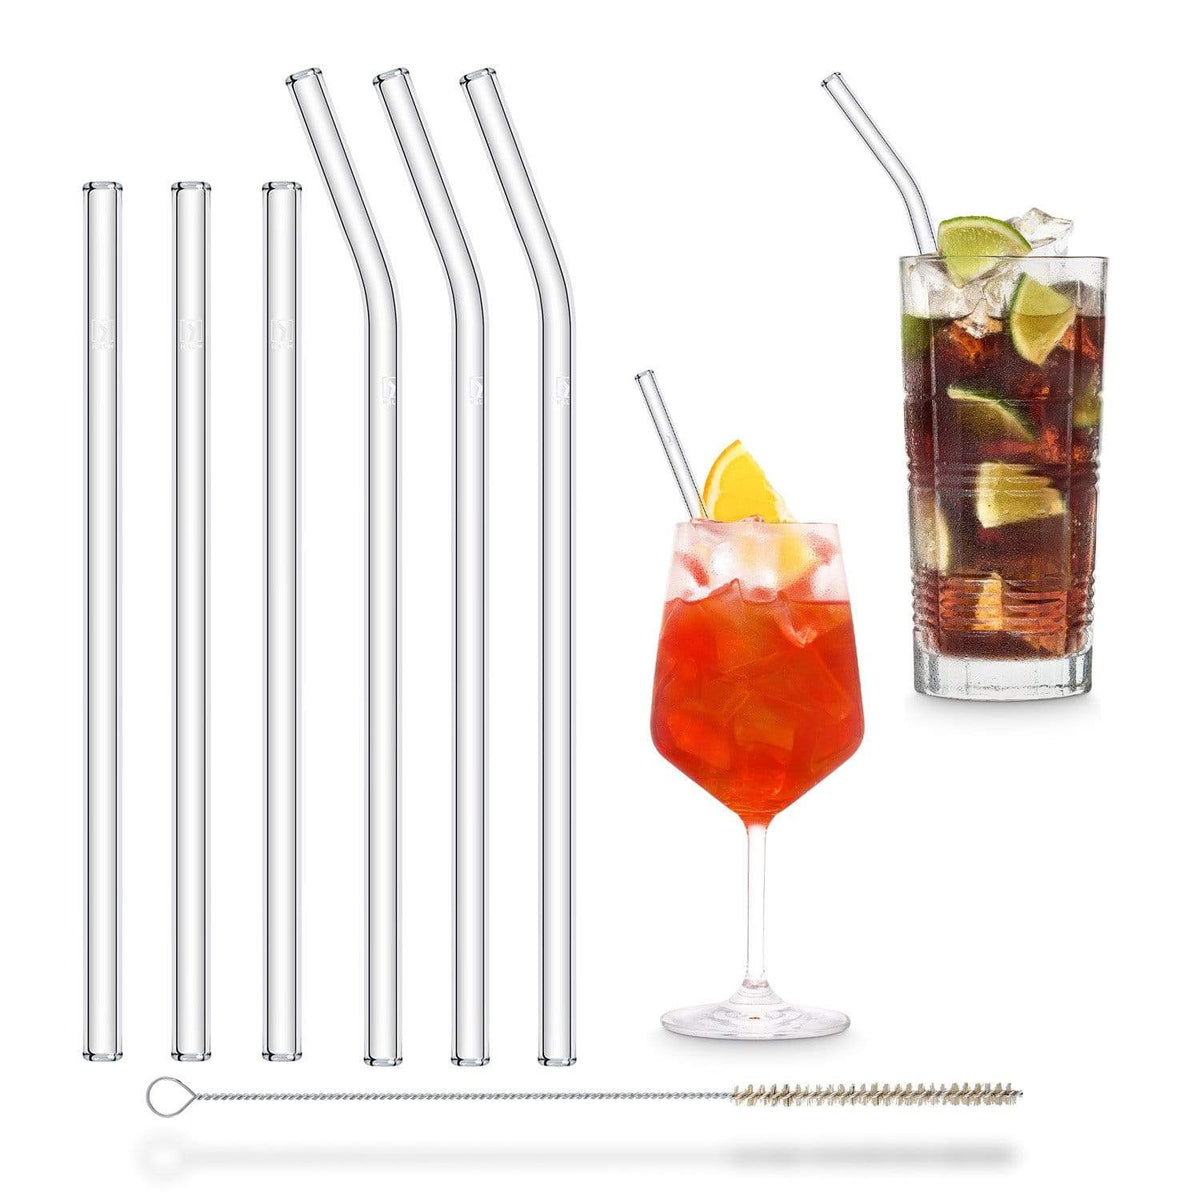 https://cdn.shopify.com/s/files/1/0250/9049/0473/products/HALM-straws-environmentally-friendly-reusable-mixed-set-gemischte-glastrinkhalm-packung-3-x-23cm-Bent-3-x-20cm-Straight-with-cleaning-brush_1200x.jpg?v=1627073457